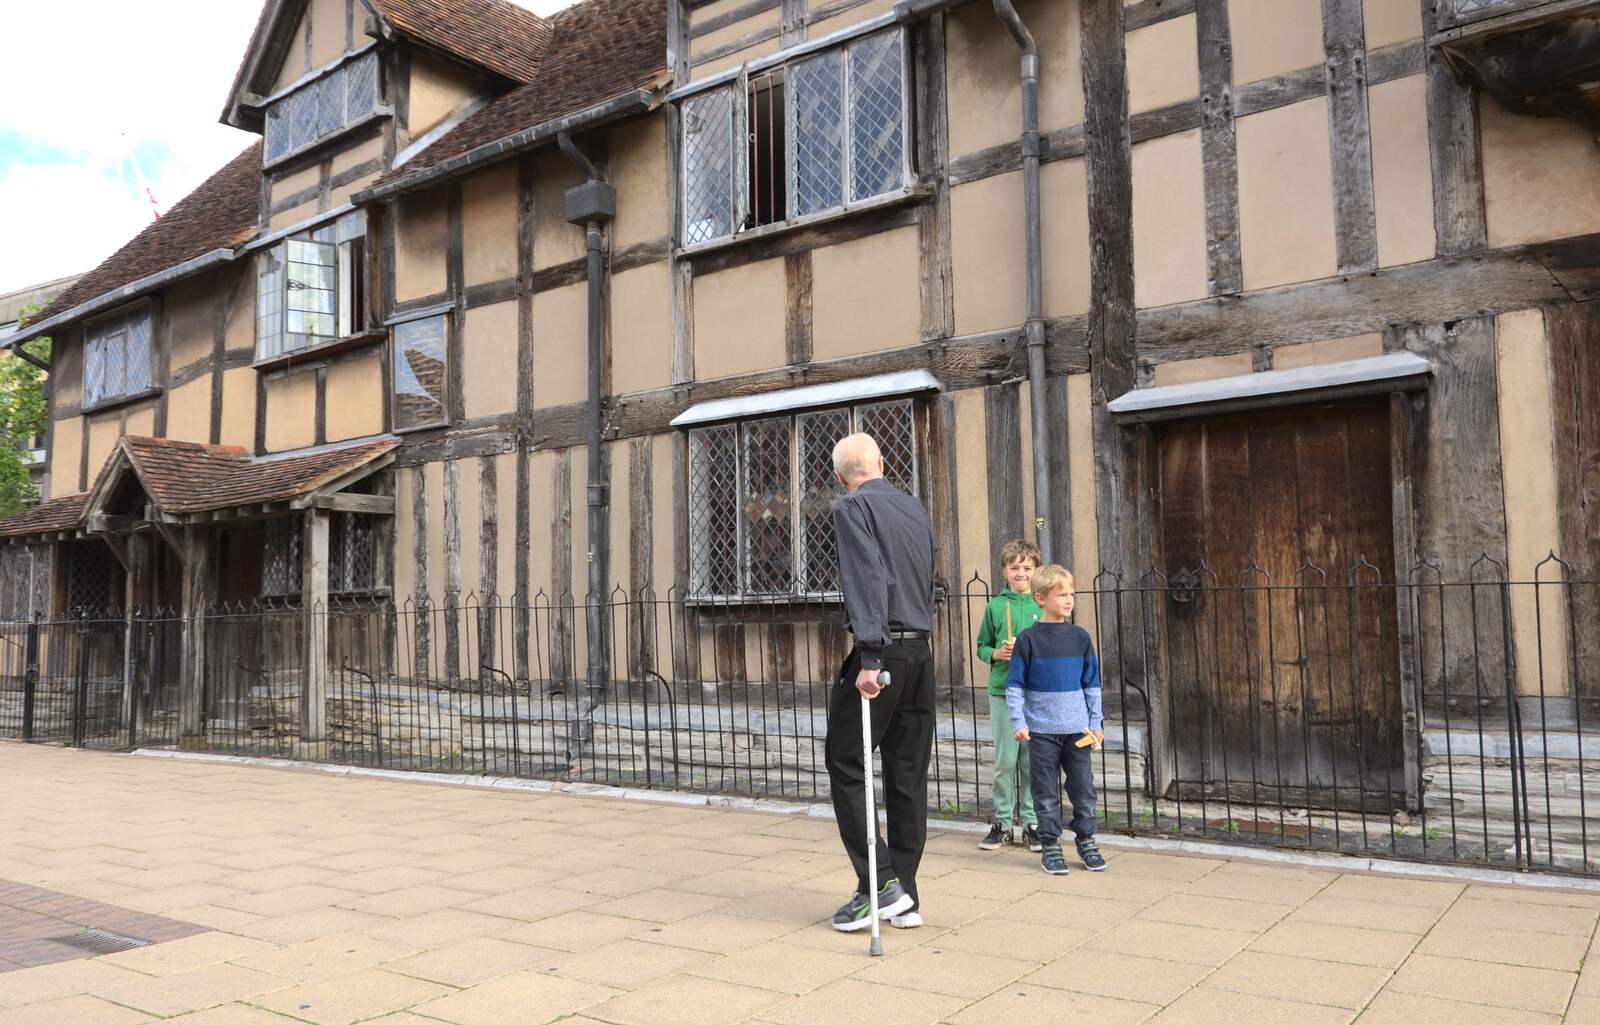 The boys outside William Shakespeare's house from A Postcard from Stratford-upon-Avon, Warwickshire - 9th September 2018